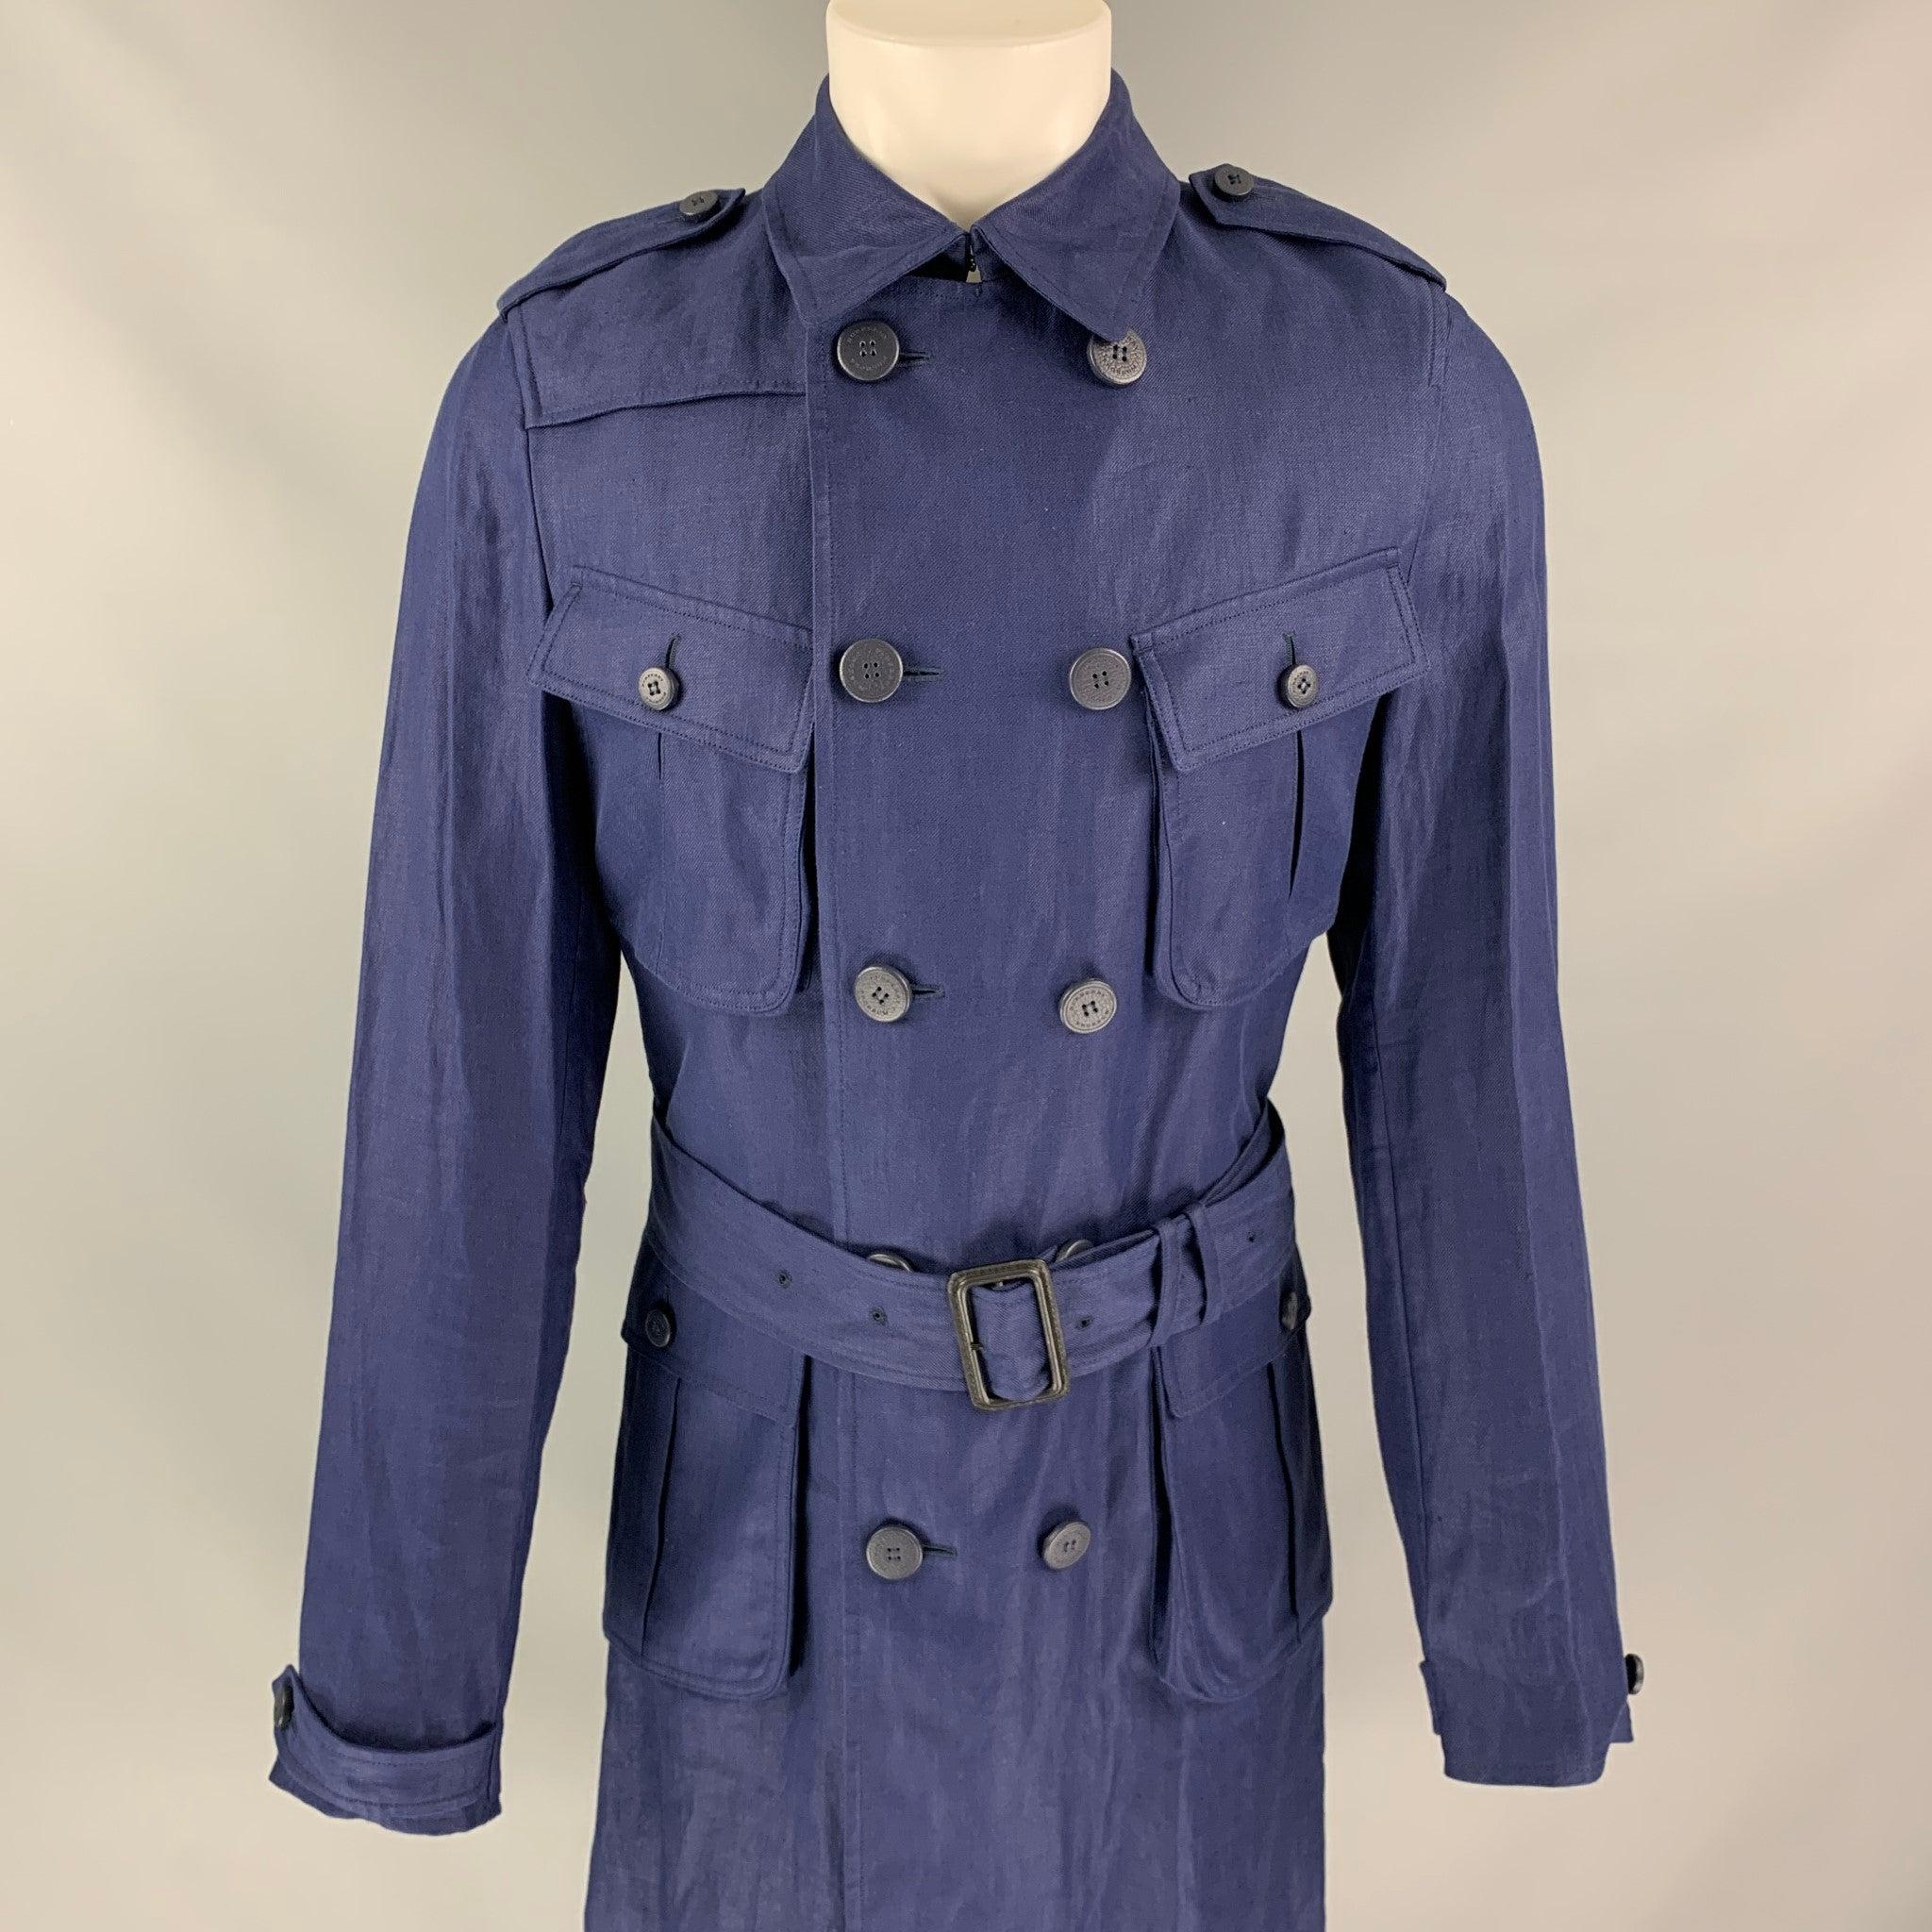 BURBERRY PRORSUM Spring 2015 Size 40 Navy Linen Trench Coat In Excellent Condition For Sale In San Francisco, CA